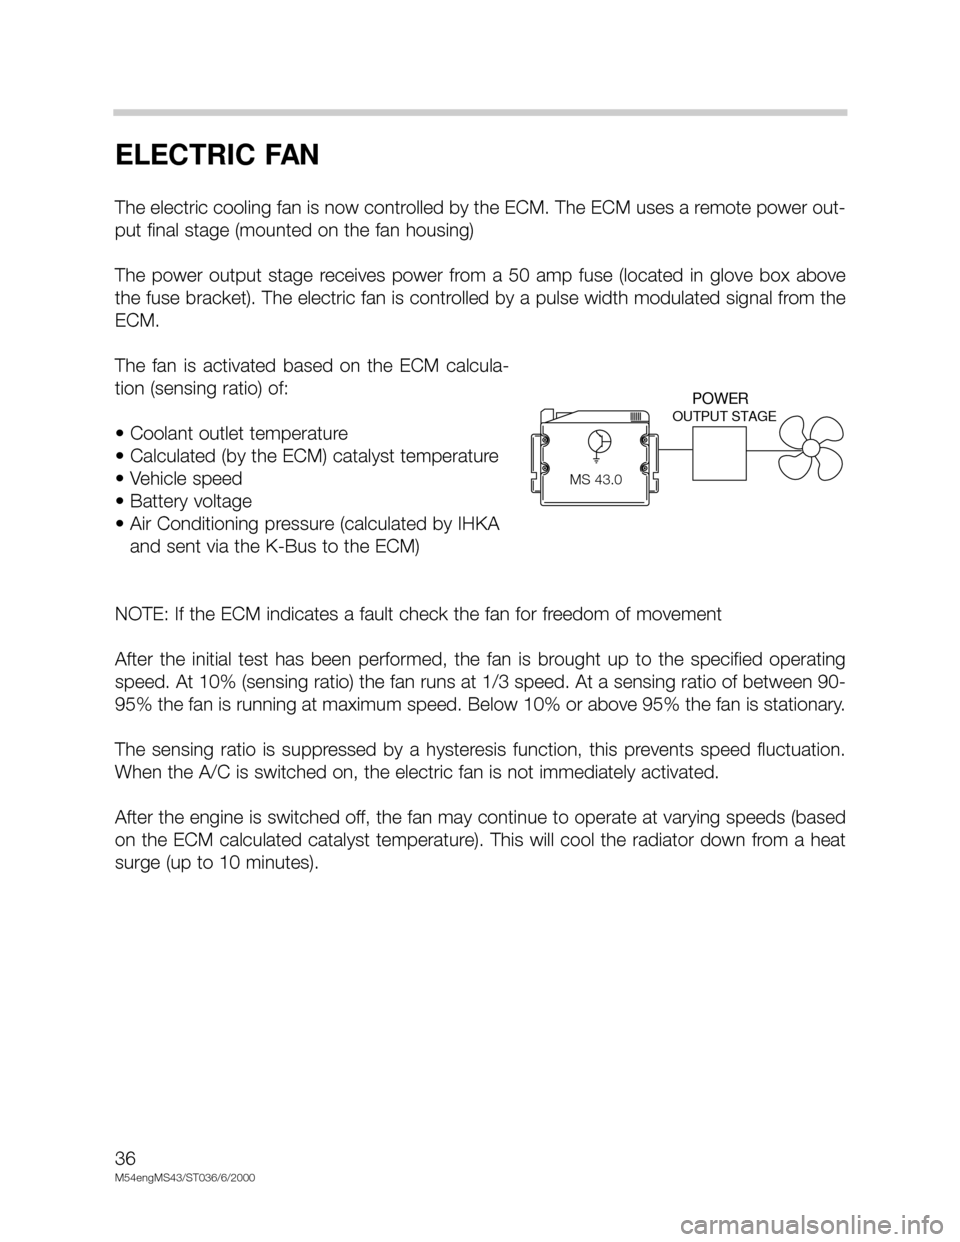 BMW X5 2000 E53 M54 Engine Workshop Manual 36
M54engMS43/ST036/6/2000
ELECTRIC FAN
The electric cooling fan is now controlled by the ECM. The ECM uses a remote power out-
put final stage (mounted on the fan housing)
The  power  output  stage  